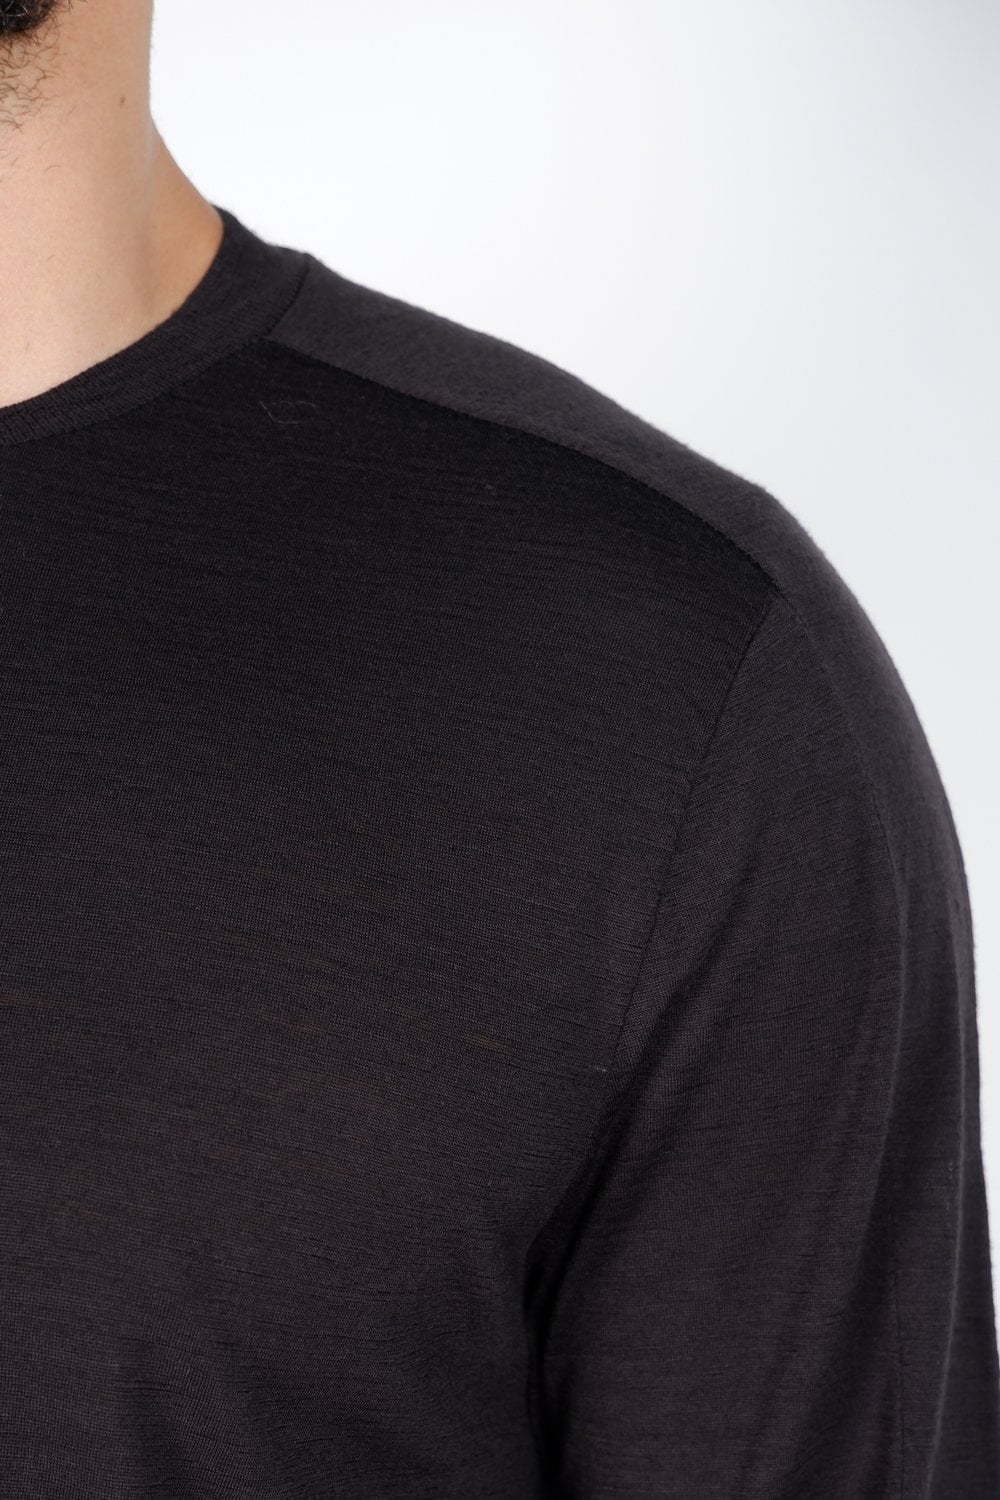 Buy the Transit Long Sleeve Light Wool T-Shirt Black at Intro. Spend £50 for free UK delivery. Official stockists. We ship worldwide.